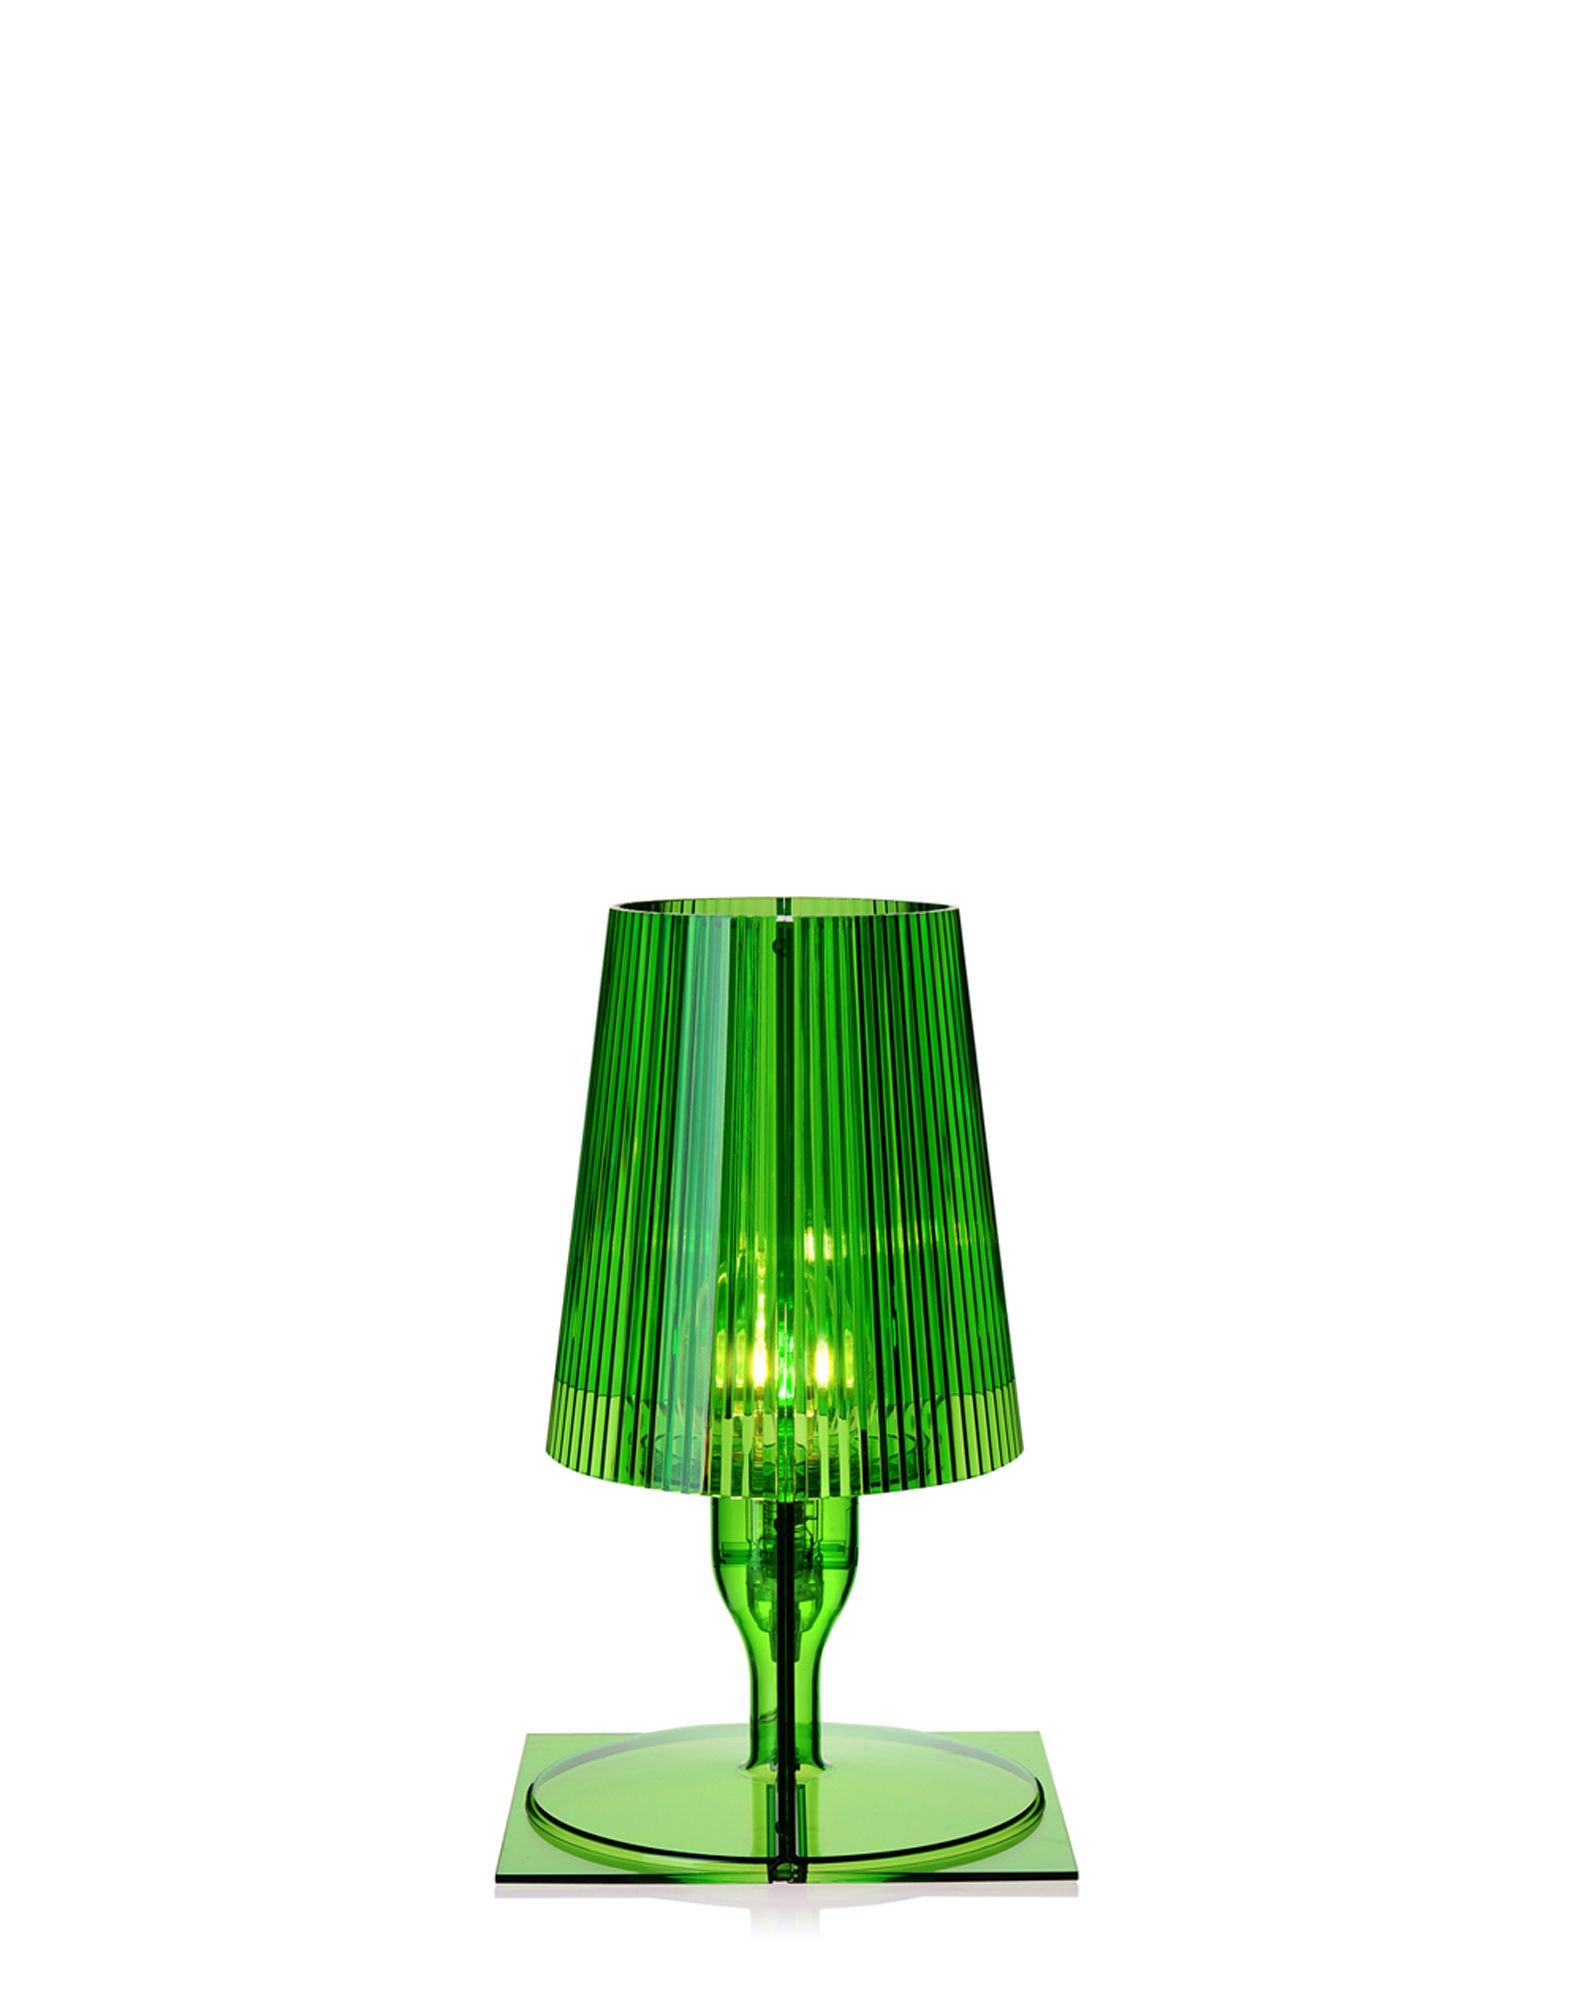 Take Table Lamp lighting from Kartell, designed by Ferruccio Laviani